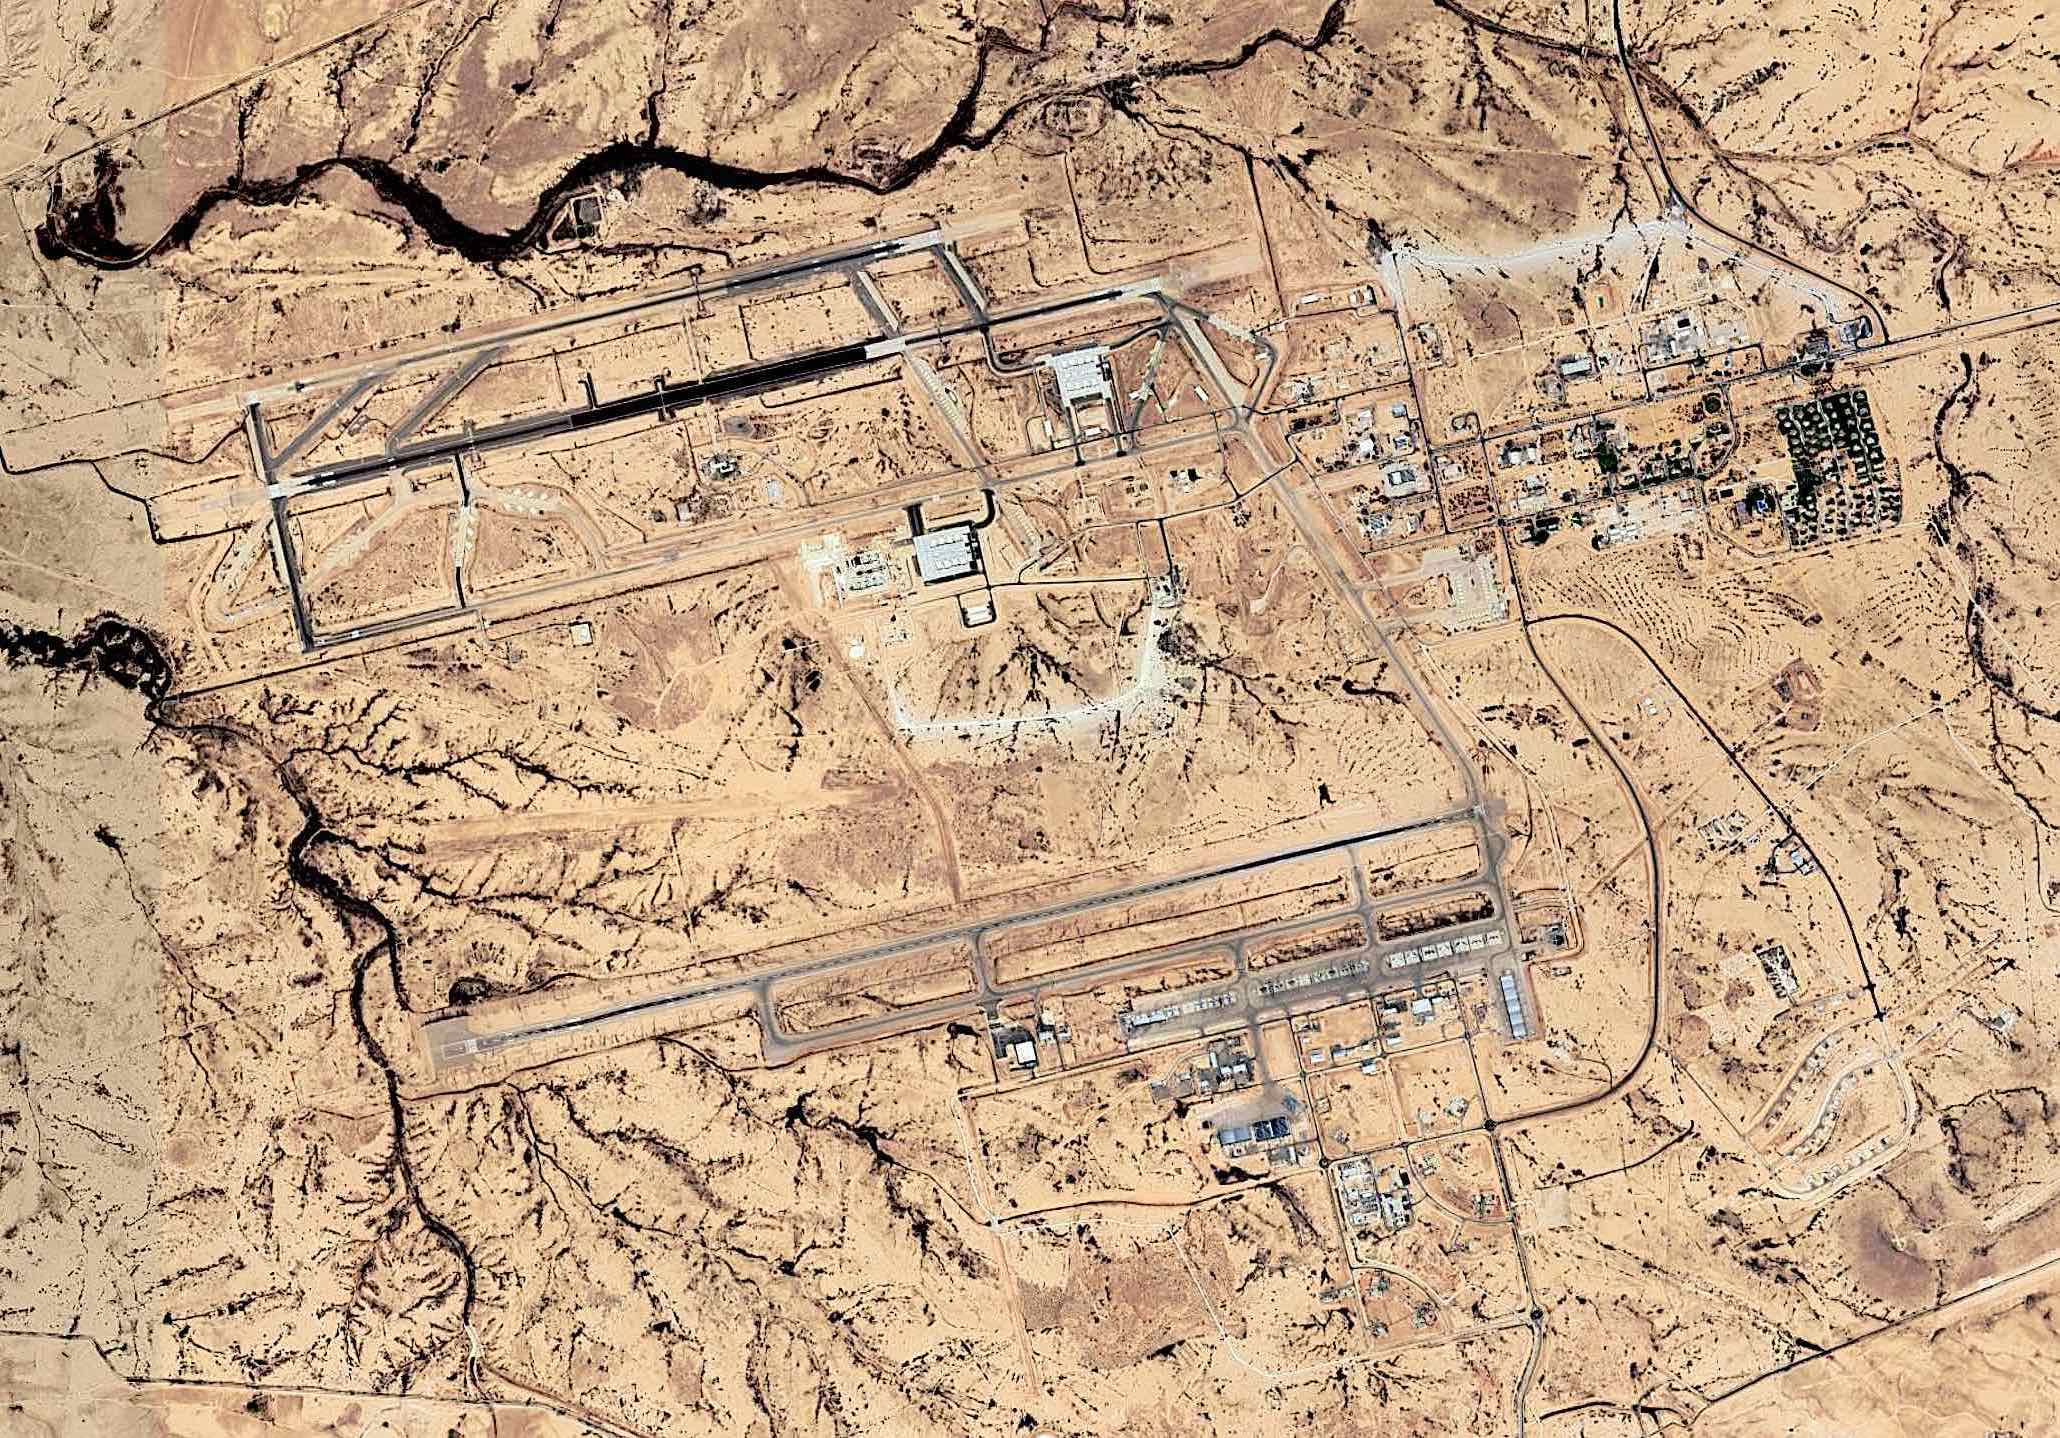 Aerial view of Israel’s Nevatim air base where a British spy plane landed in February. (Google Earth)